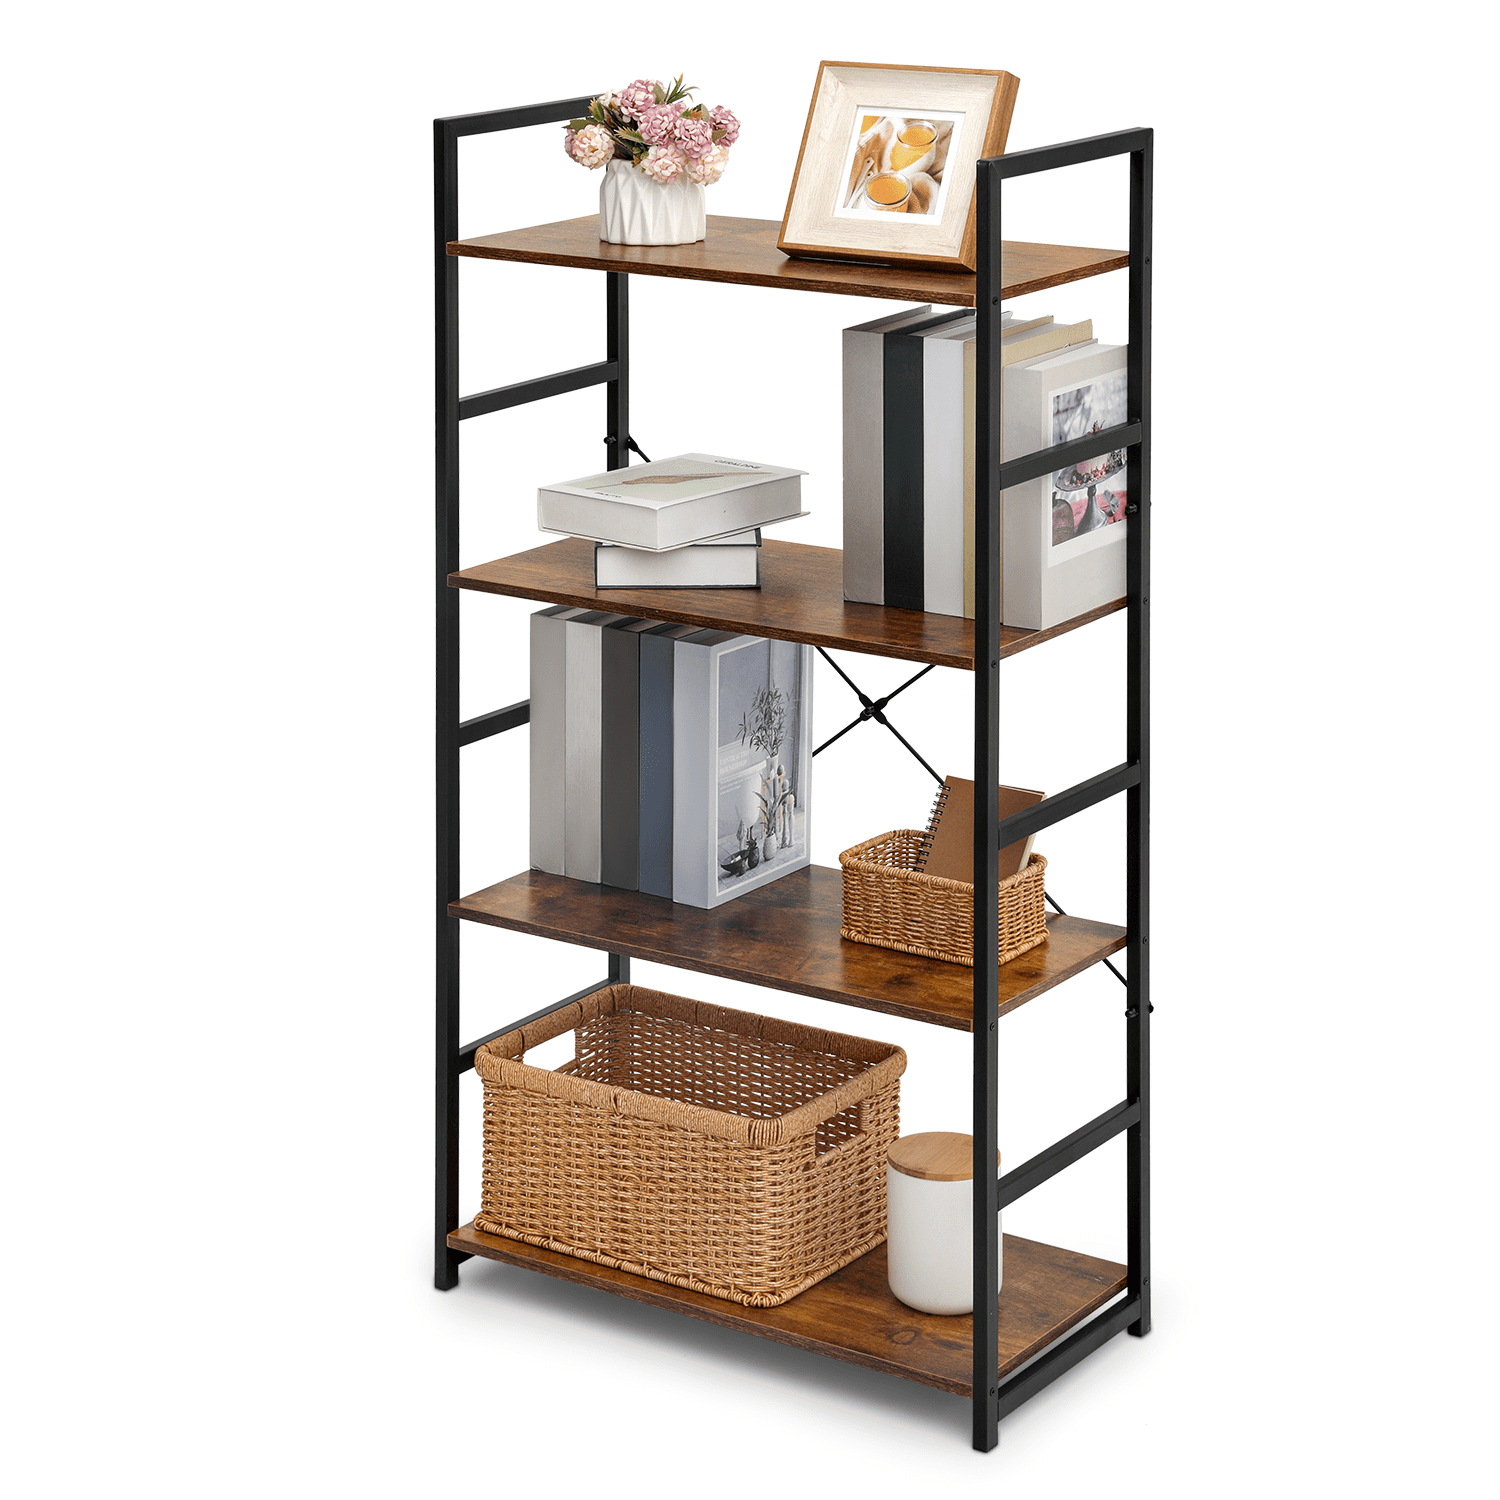 4-Level Display Shelves Against The Wall  Mini Book Photo Crystal Dis –  Primo Supply l Curated Problem Solving Products